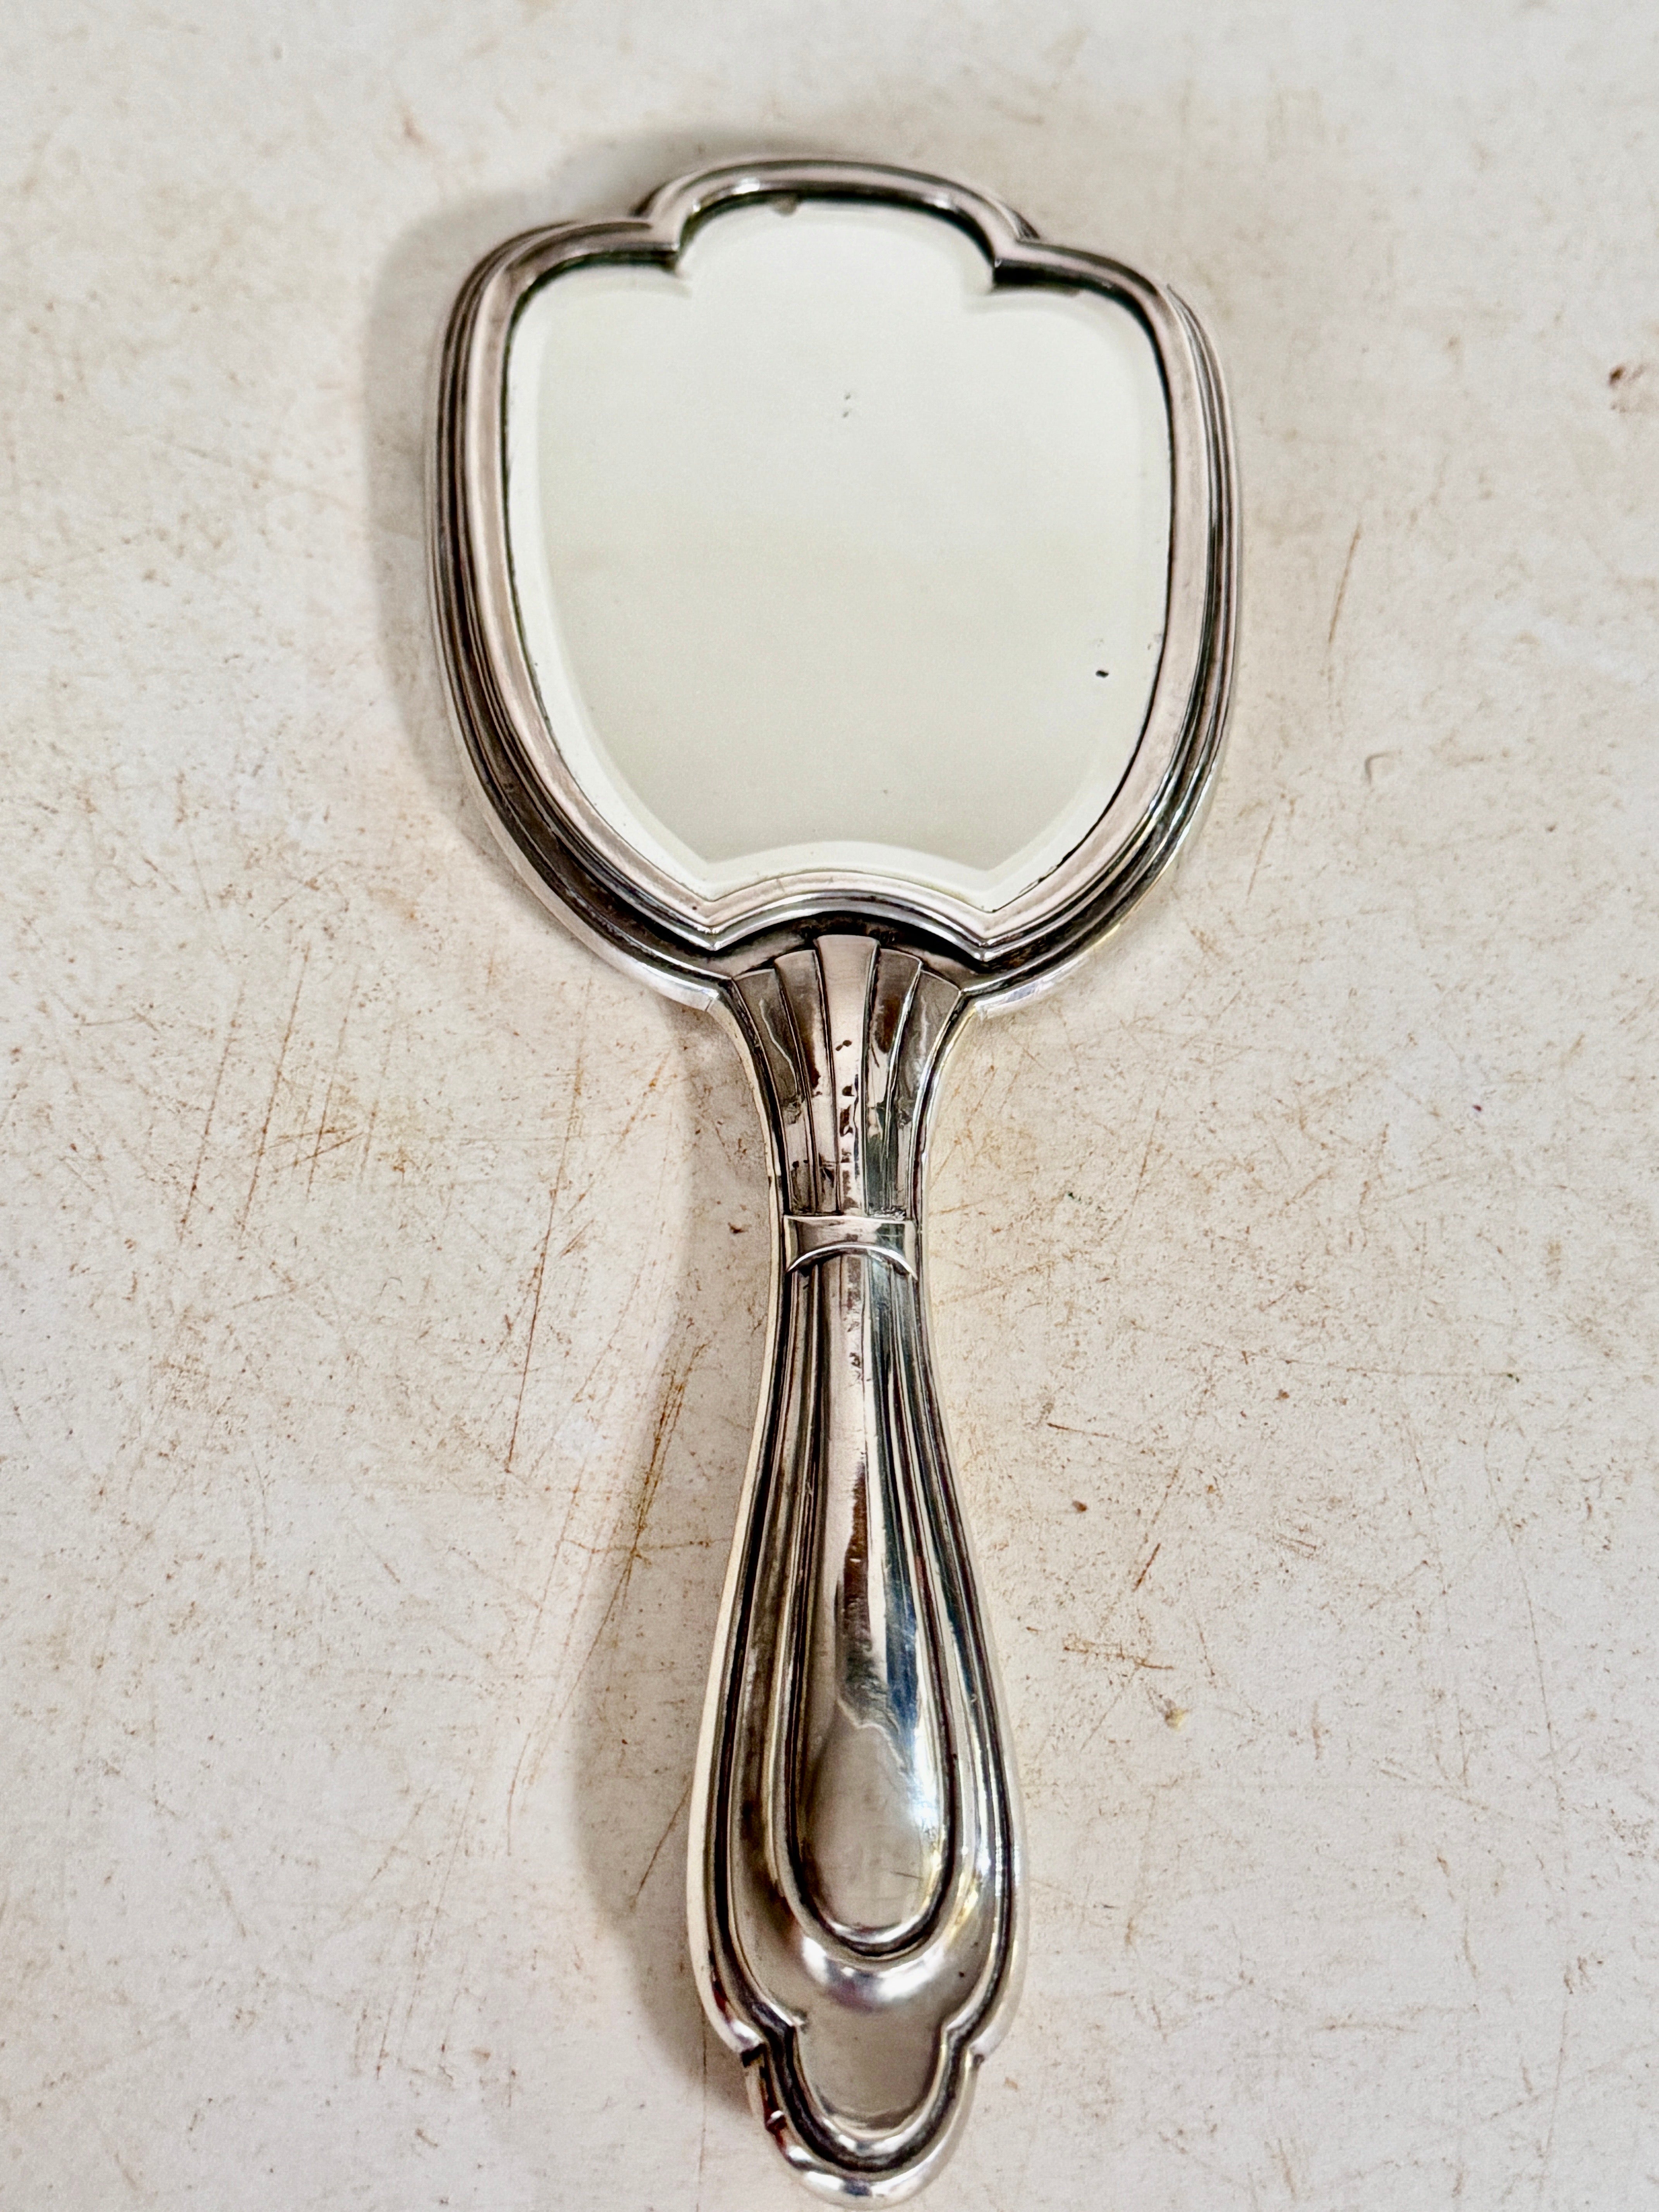 This mirror is an hand mirror. In Steerling Silver, with the hallmark of silver and 800g indicated. It has been made in France circa 1940.
Silver color.